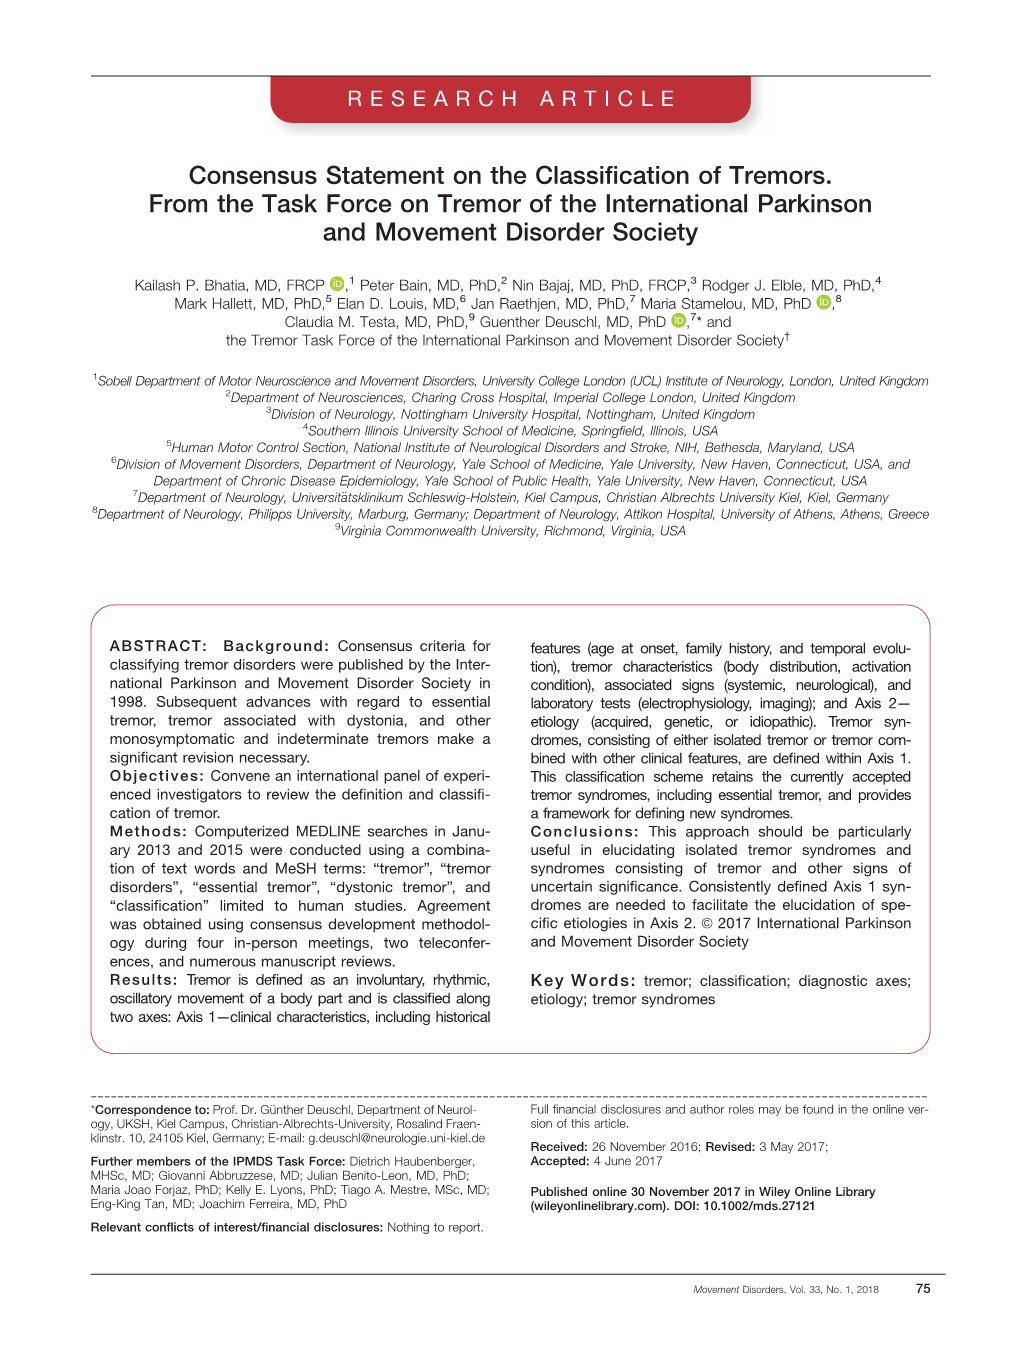 Consensus Statement on the Classification of Tremors. from the Task Force on Tremor of the International Parkinson and Movement